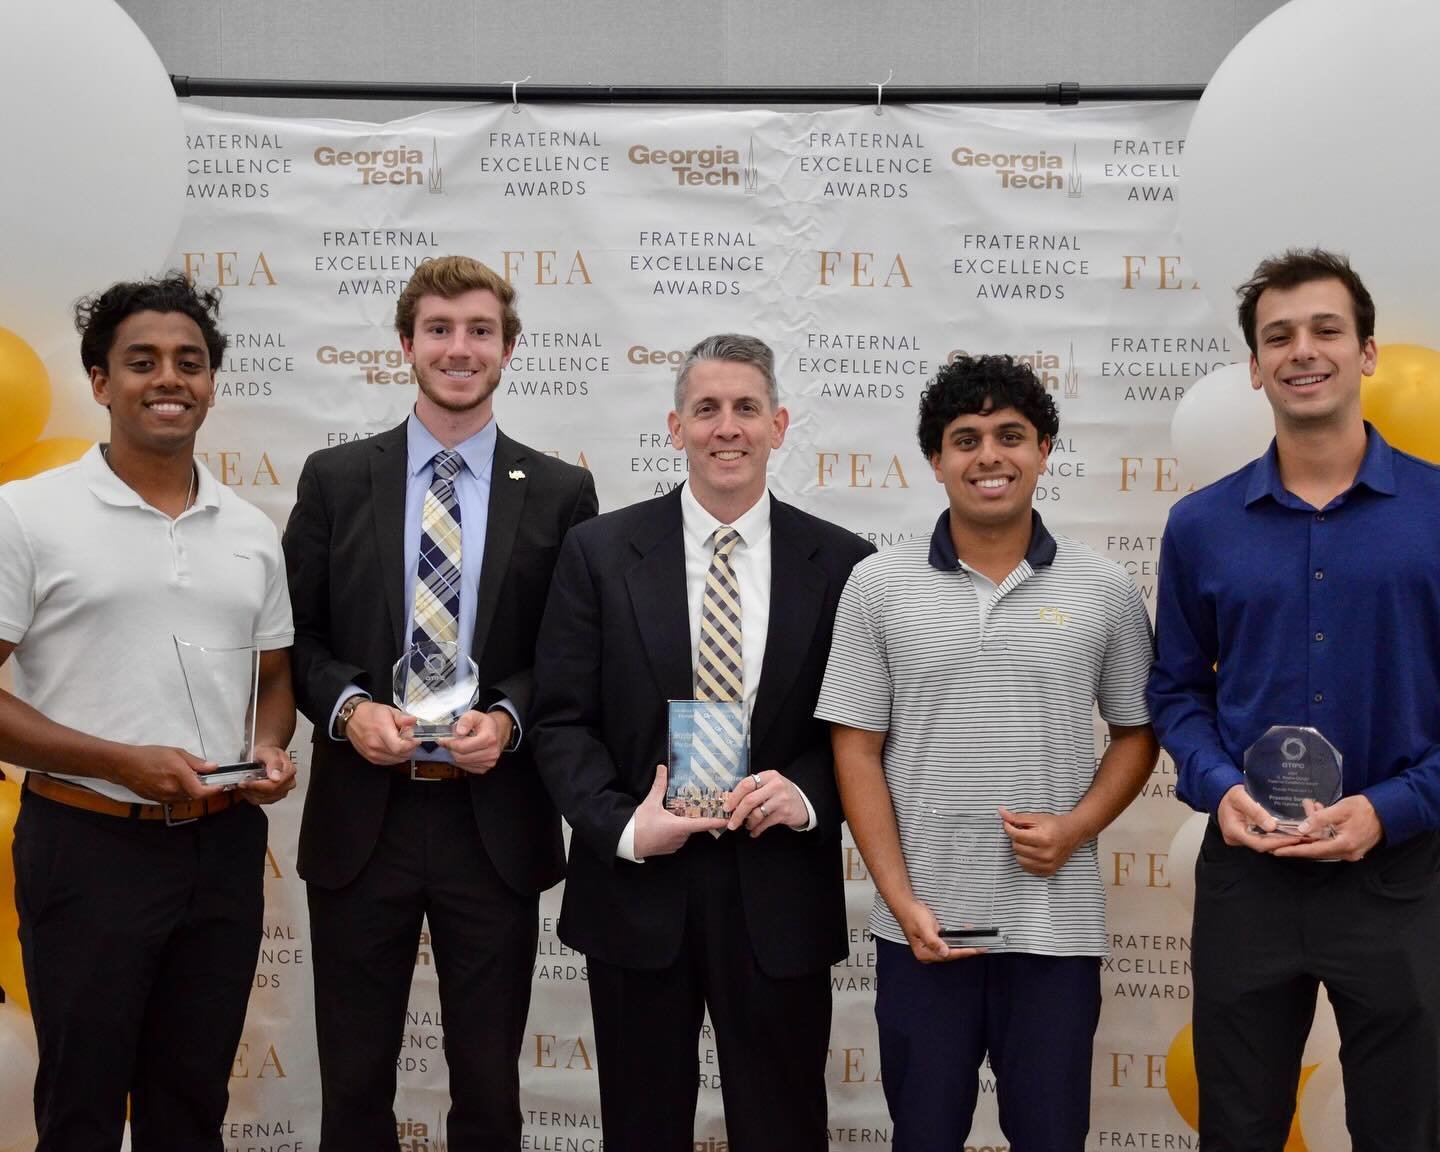 Last week, FIJI received 5 Fraternity Excellence Awards❕

1. James E. Dull Award 
Awarded to the best overall fraternity chapter on campus.

2. Community Impact Award
Acknowledges a chapter with an admirable community involvement and has raised consi